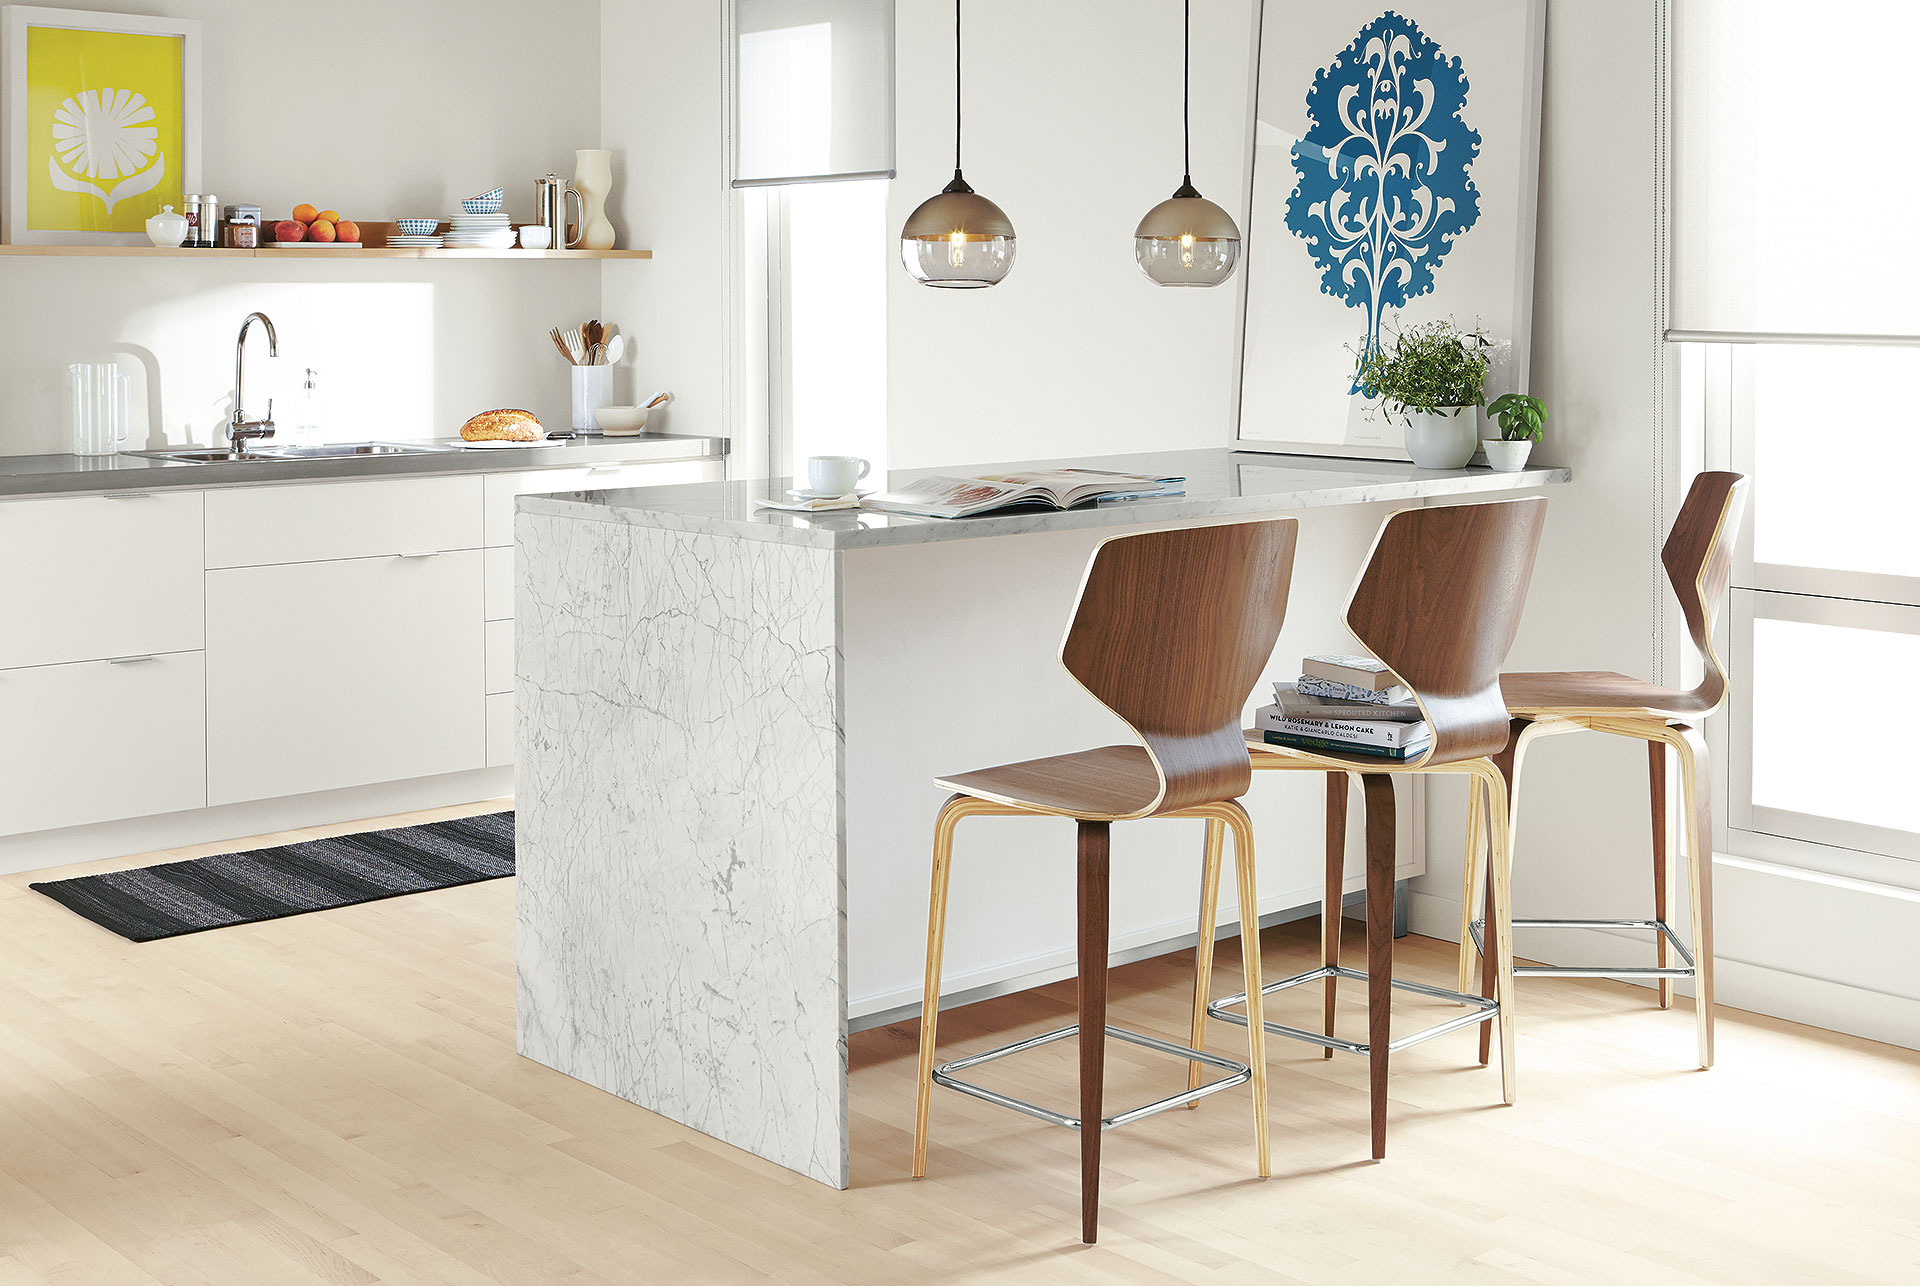 How To Choose Counter Bar Stools, High Quality Kitchen Bar Stools